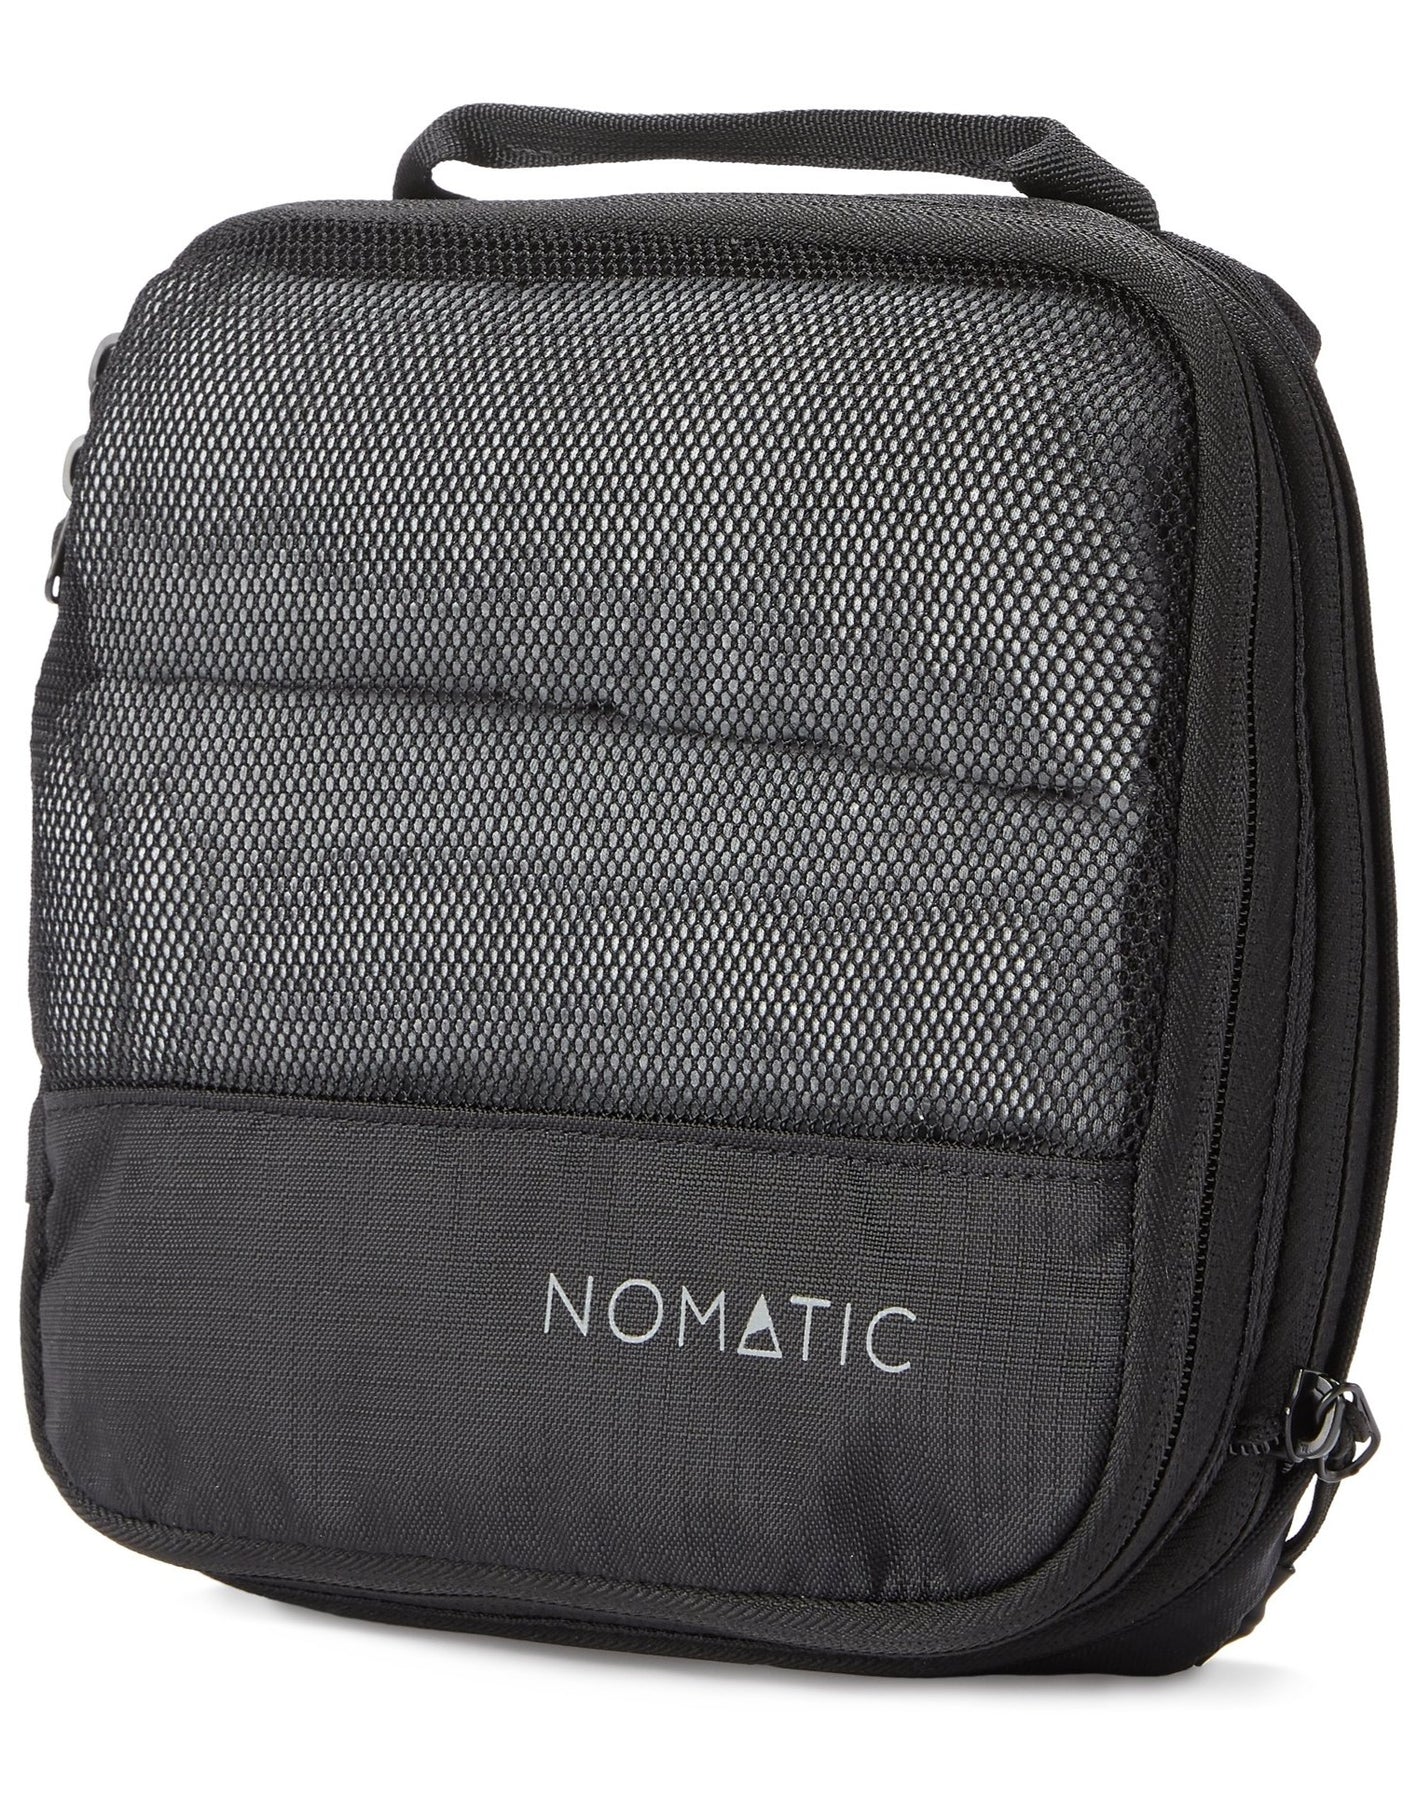 https://cdn.shopify.com/s/files/1/0268/1133/4741/products/Nomatic_PackingCube_Sm_Angle_20190702_1800x1800.jpg?v=1600368111